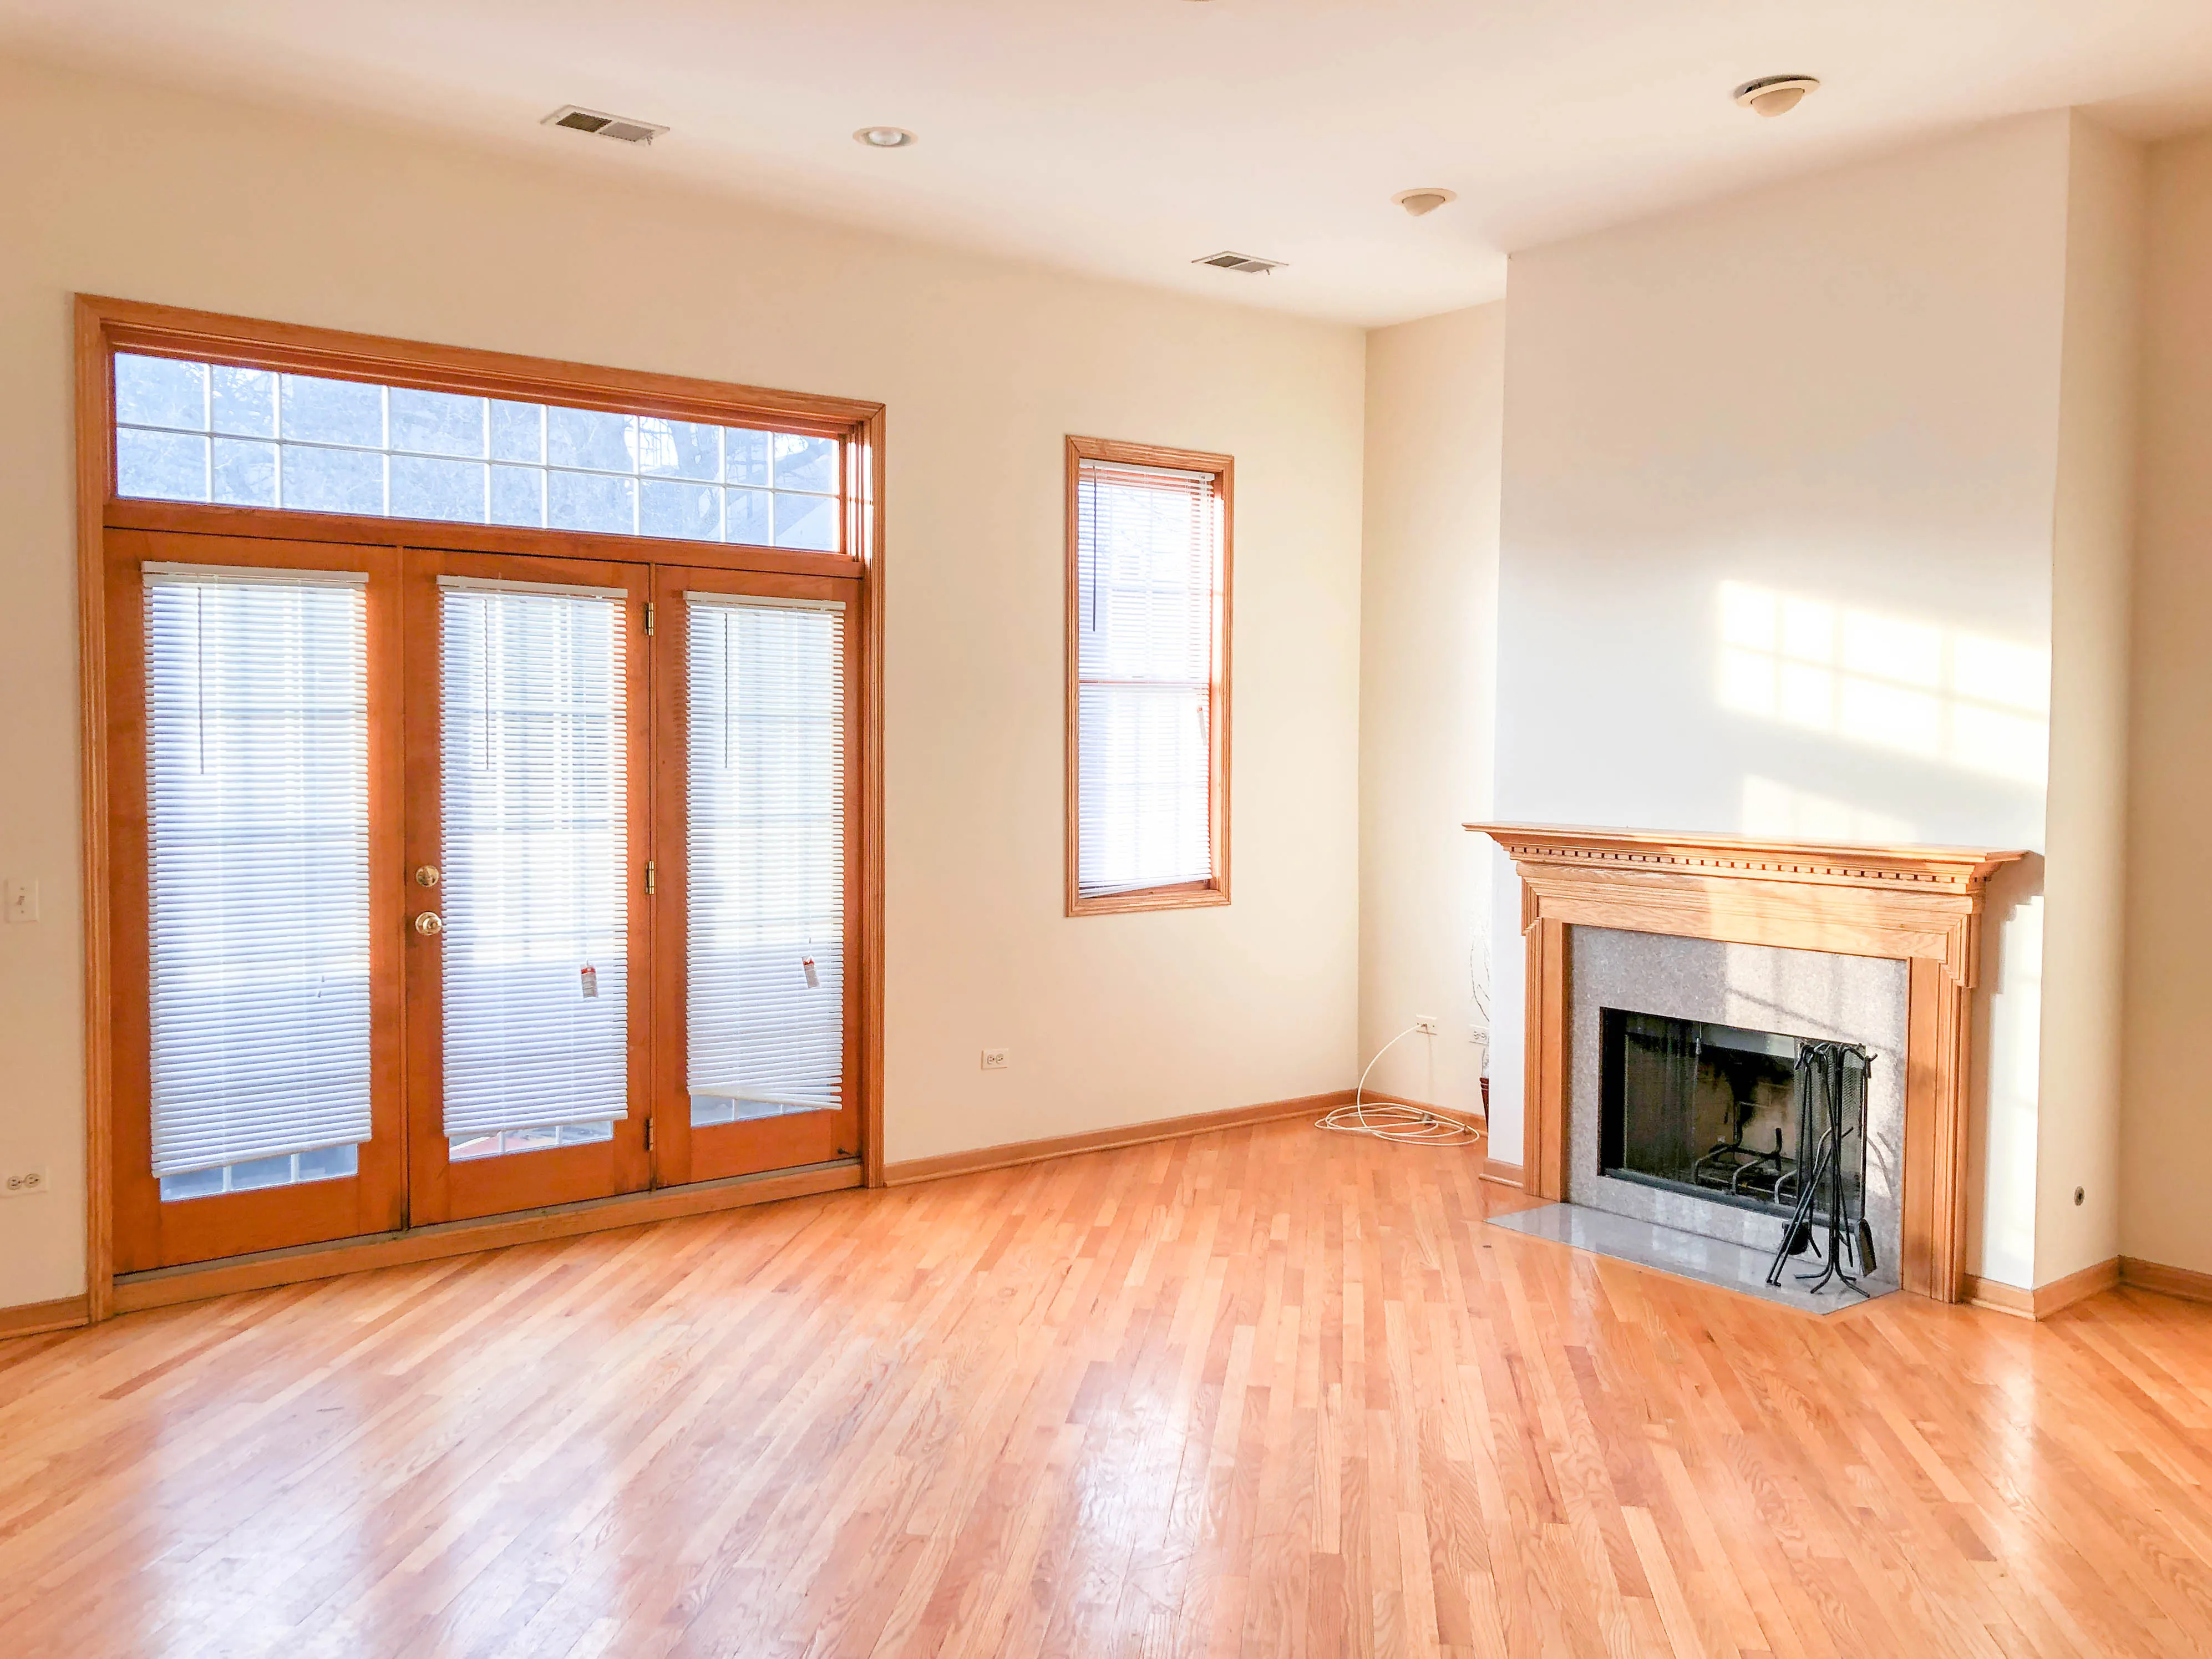 2539 N Southport Ave 60614 60614-unit#2N-Chicago-IL